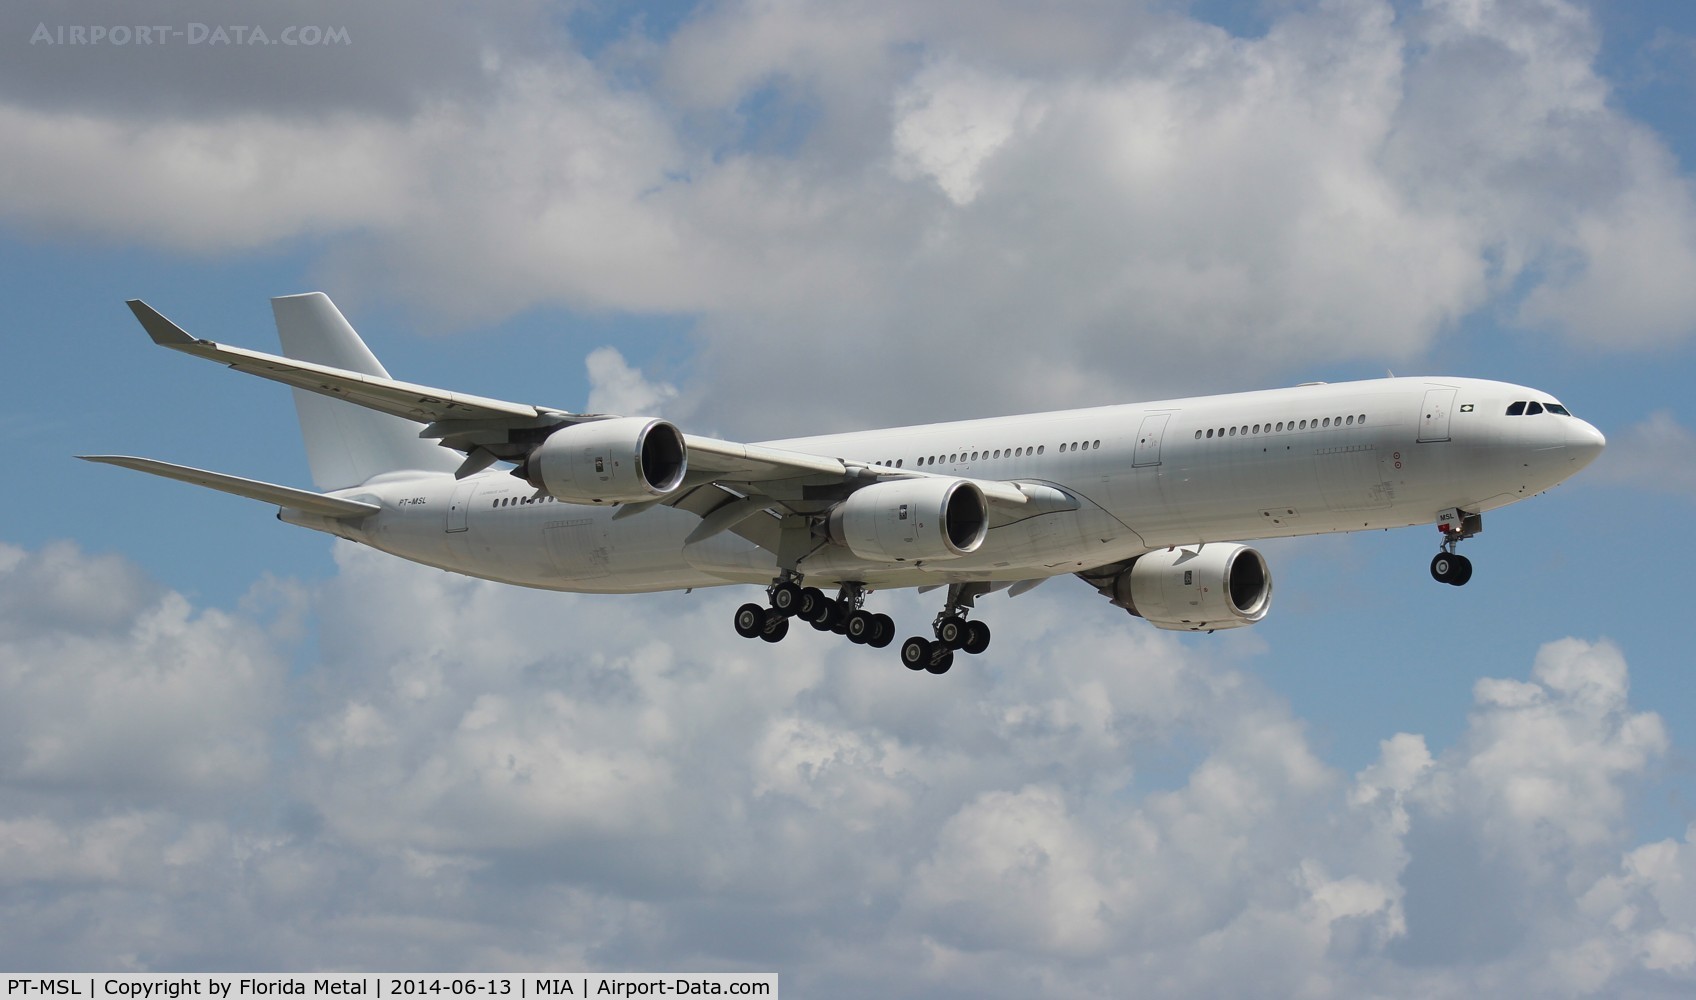 PT-MSL, 2003 Airbus A340-541 C/N 464, Untitled TAM A340-500